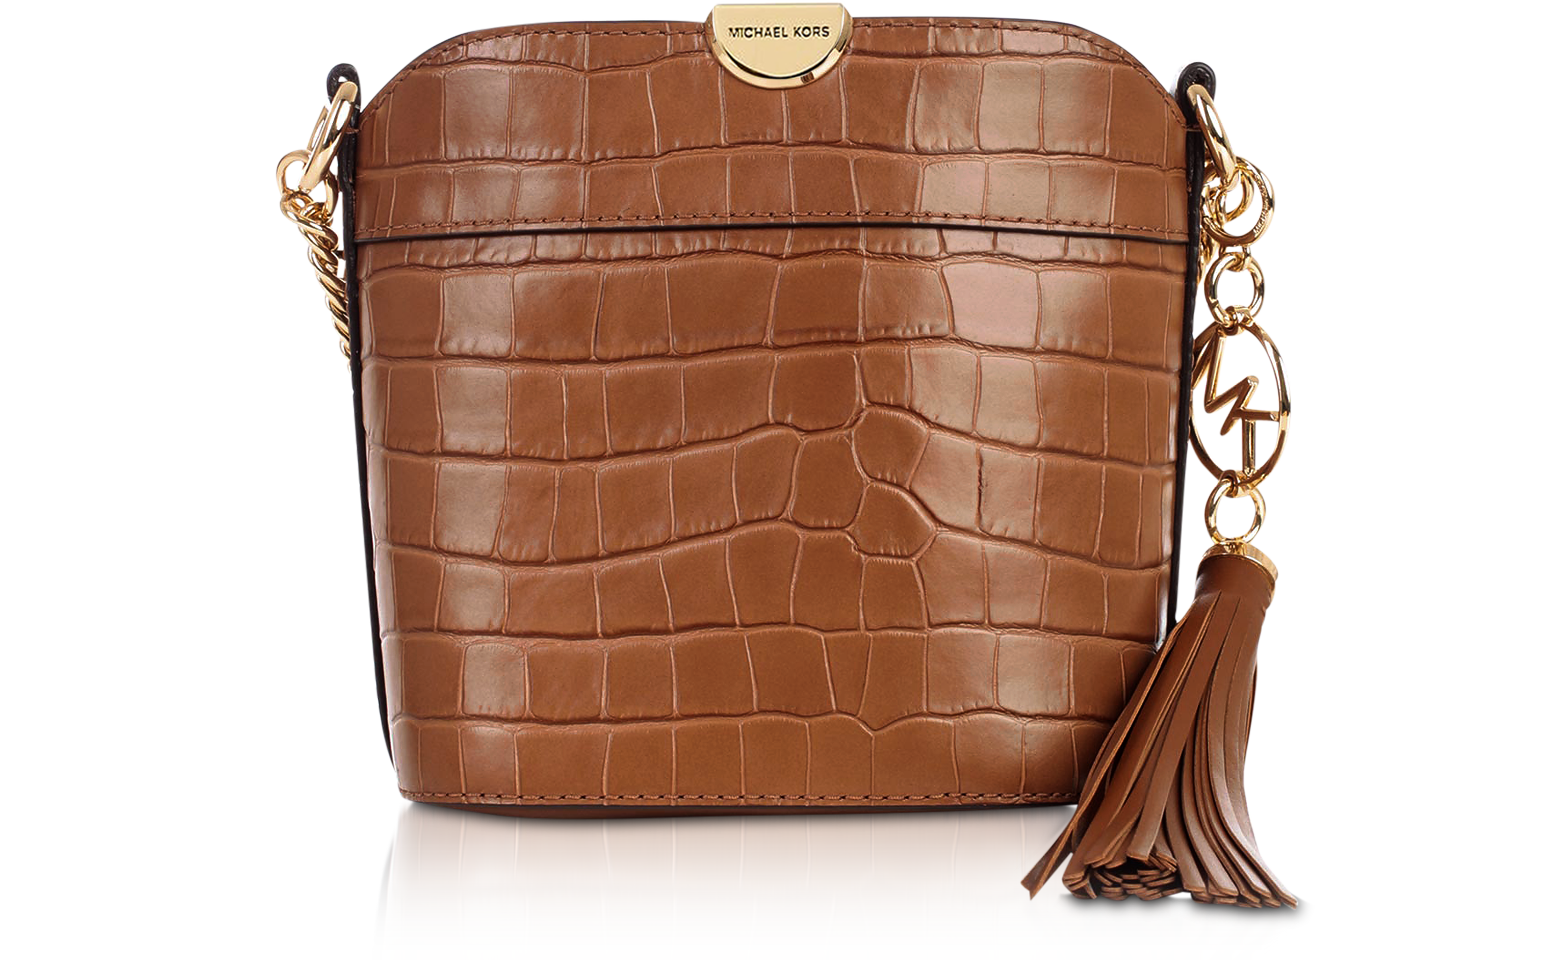 Michael Kors Chestnut Xs Croco Embossed Leather Bea Bucket Bag at FORZIERI